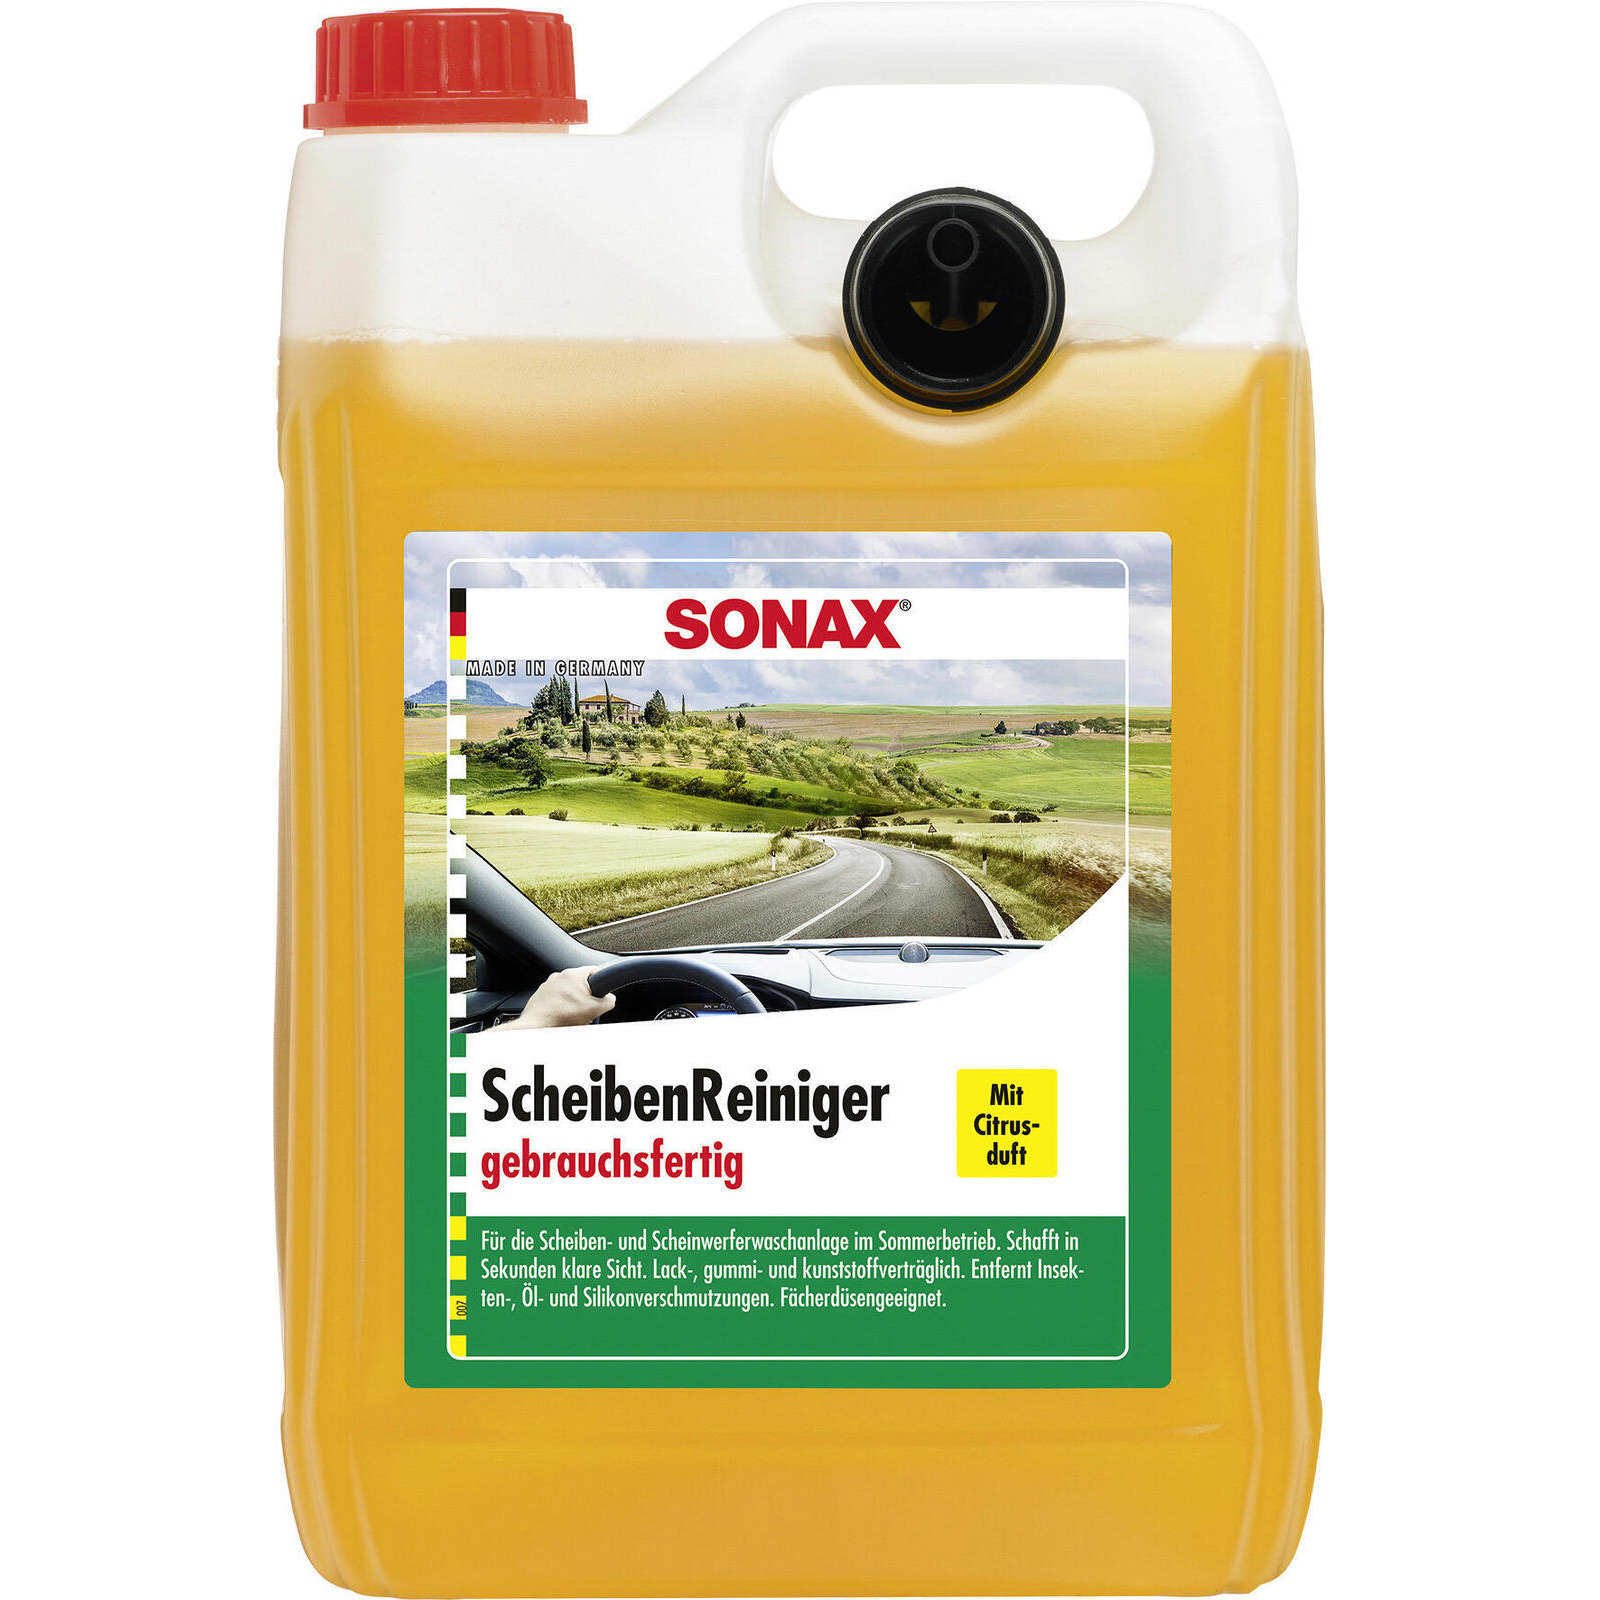 SONAX Cleaner, window cleaning system Windscreen wash ready-to-use lemon